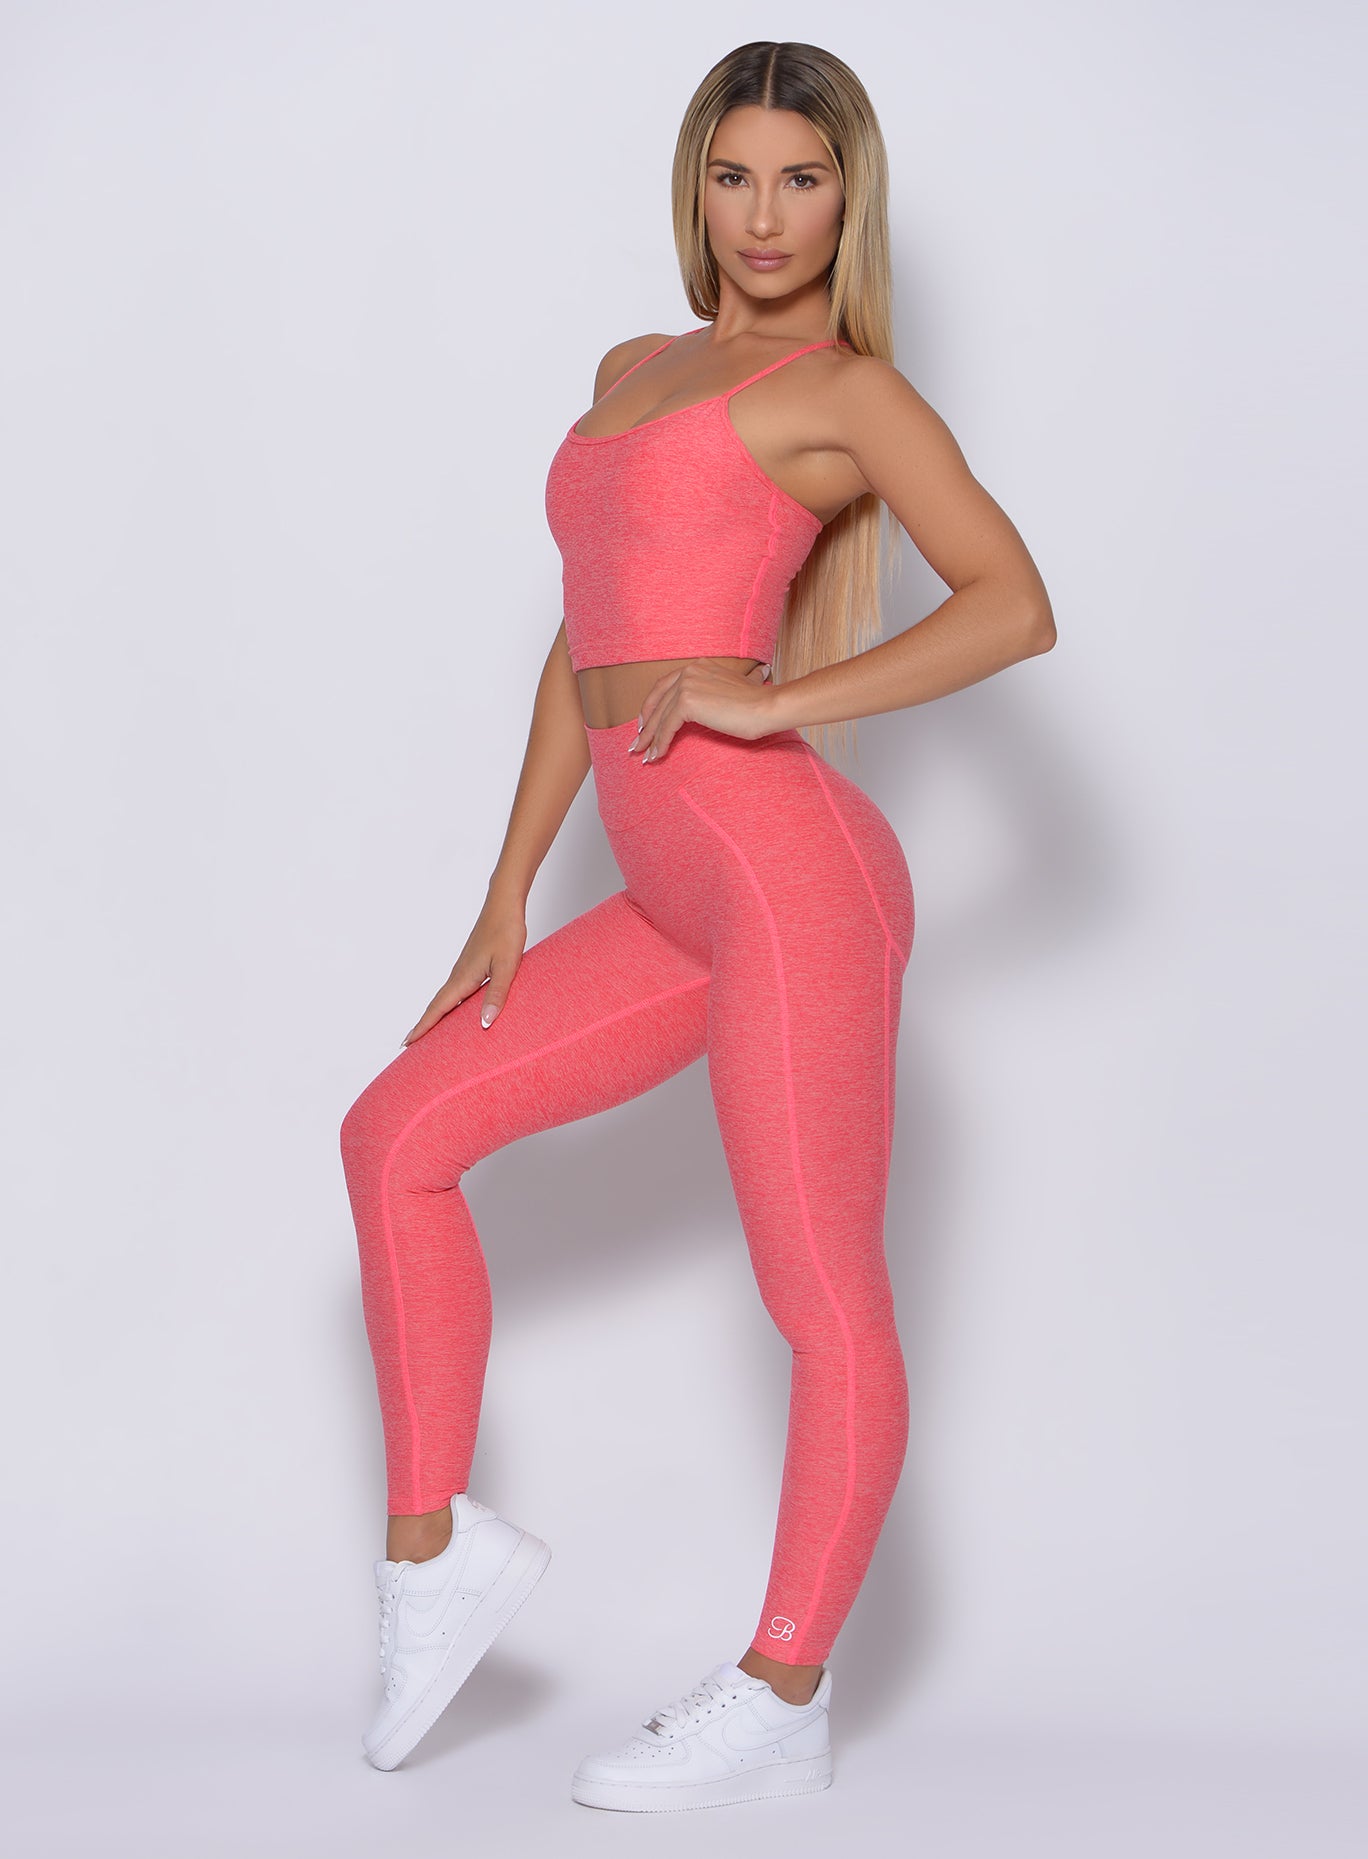 Left side view of the model angled left wearing our uplift leggings in papaya color and a matching bra 